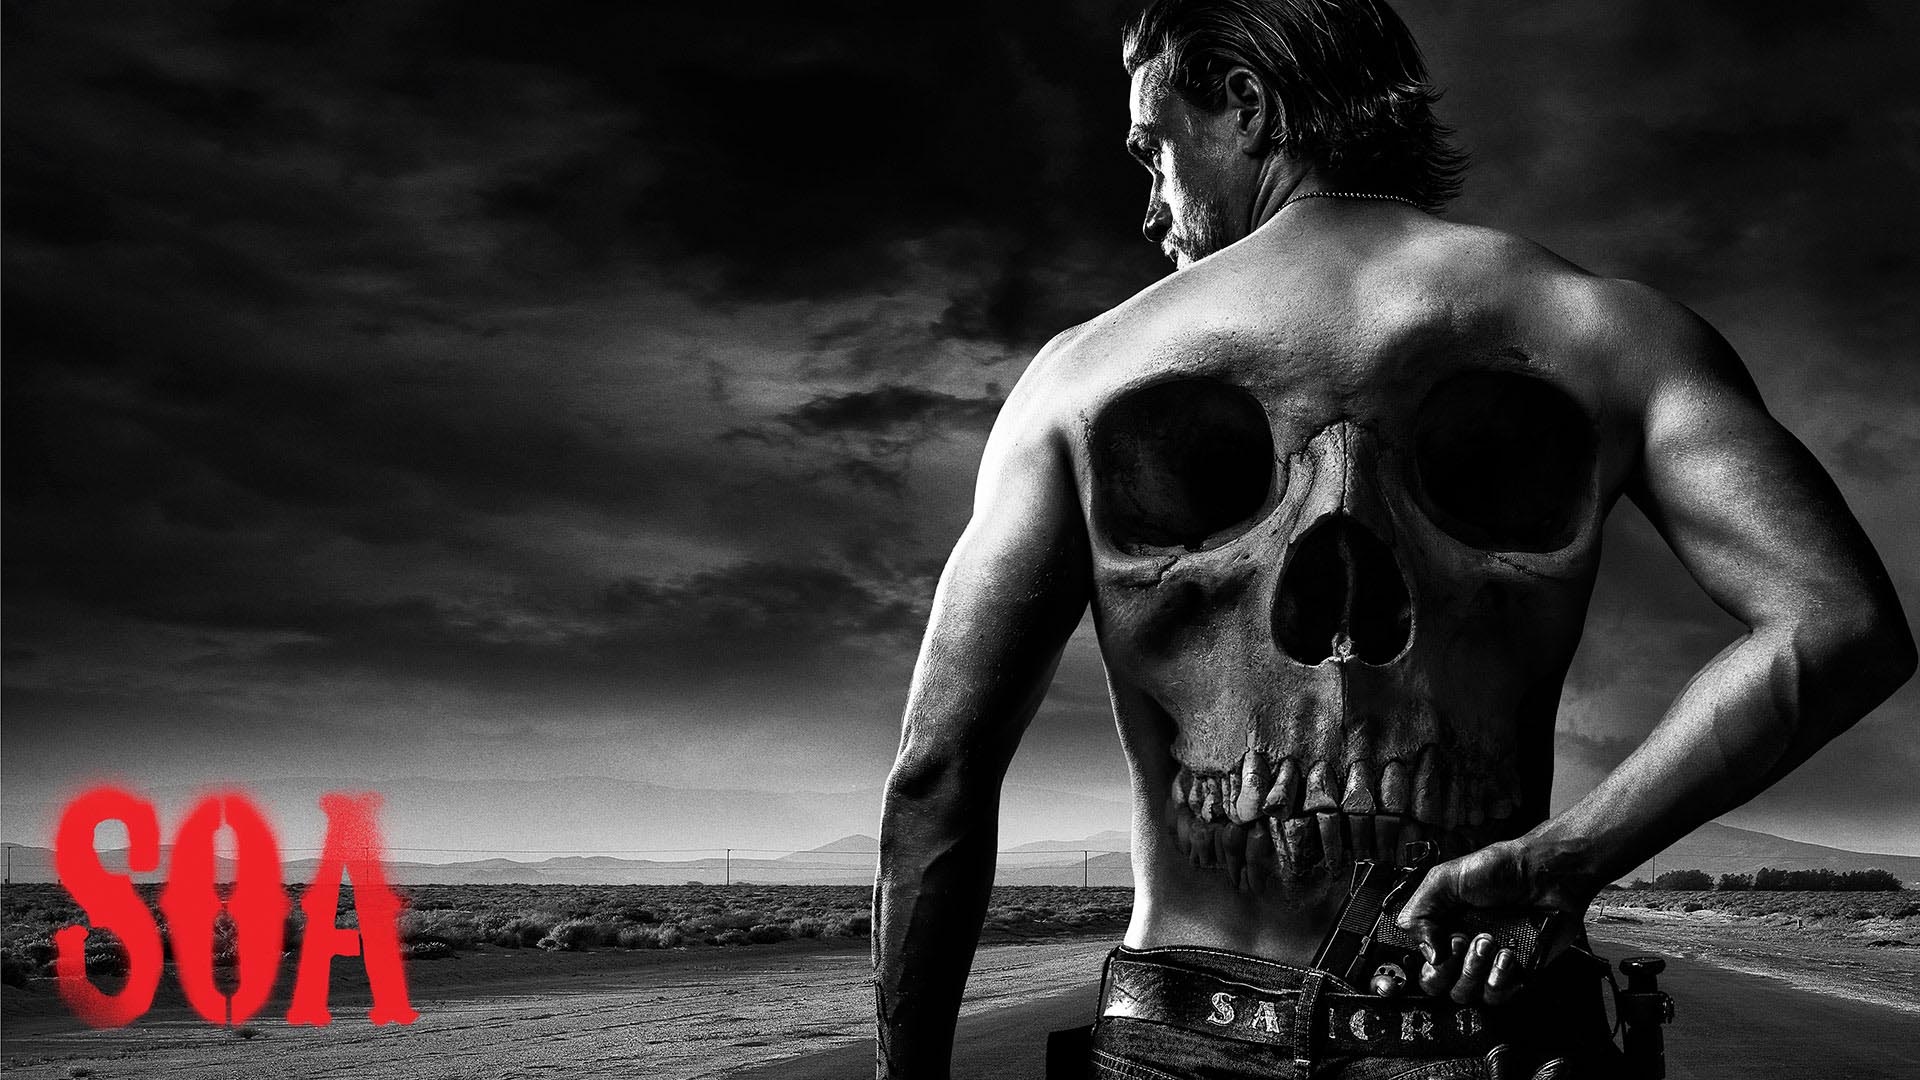 Best Image Sons Of Anarchy Wallpaper Amazing